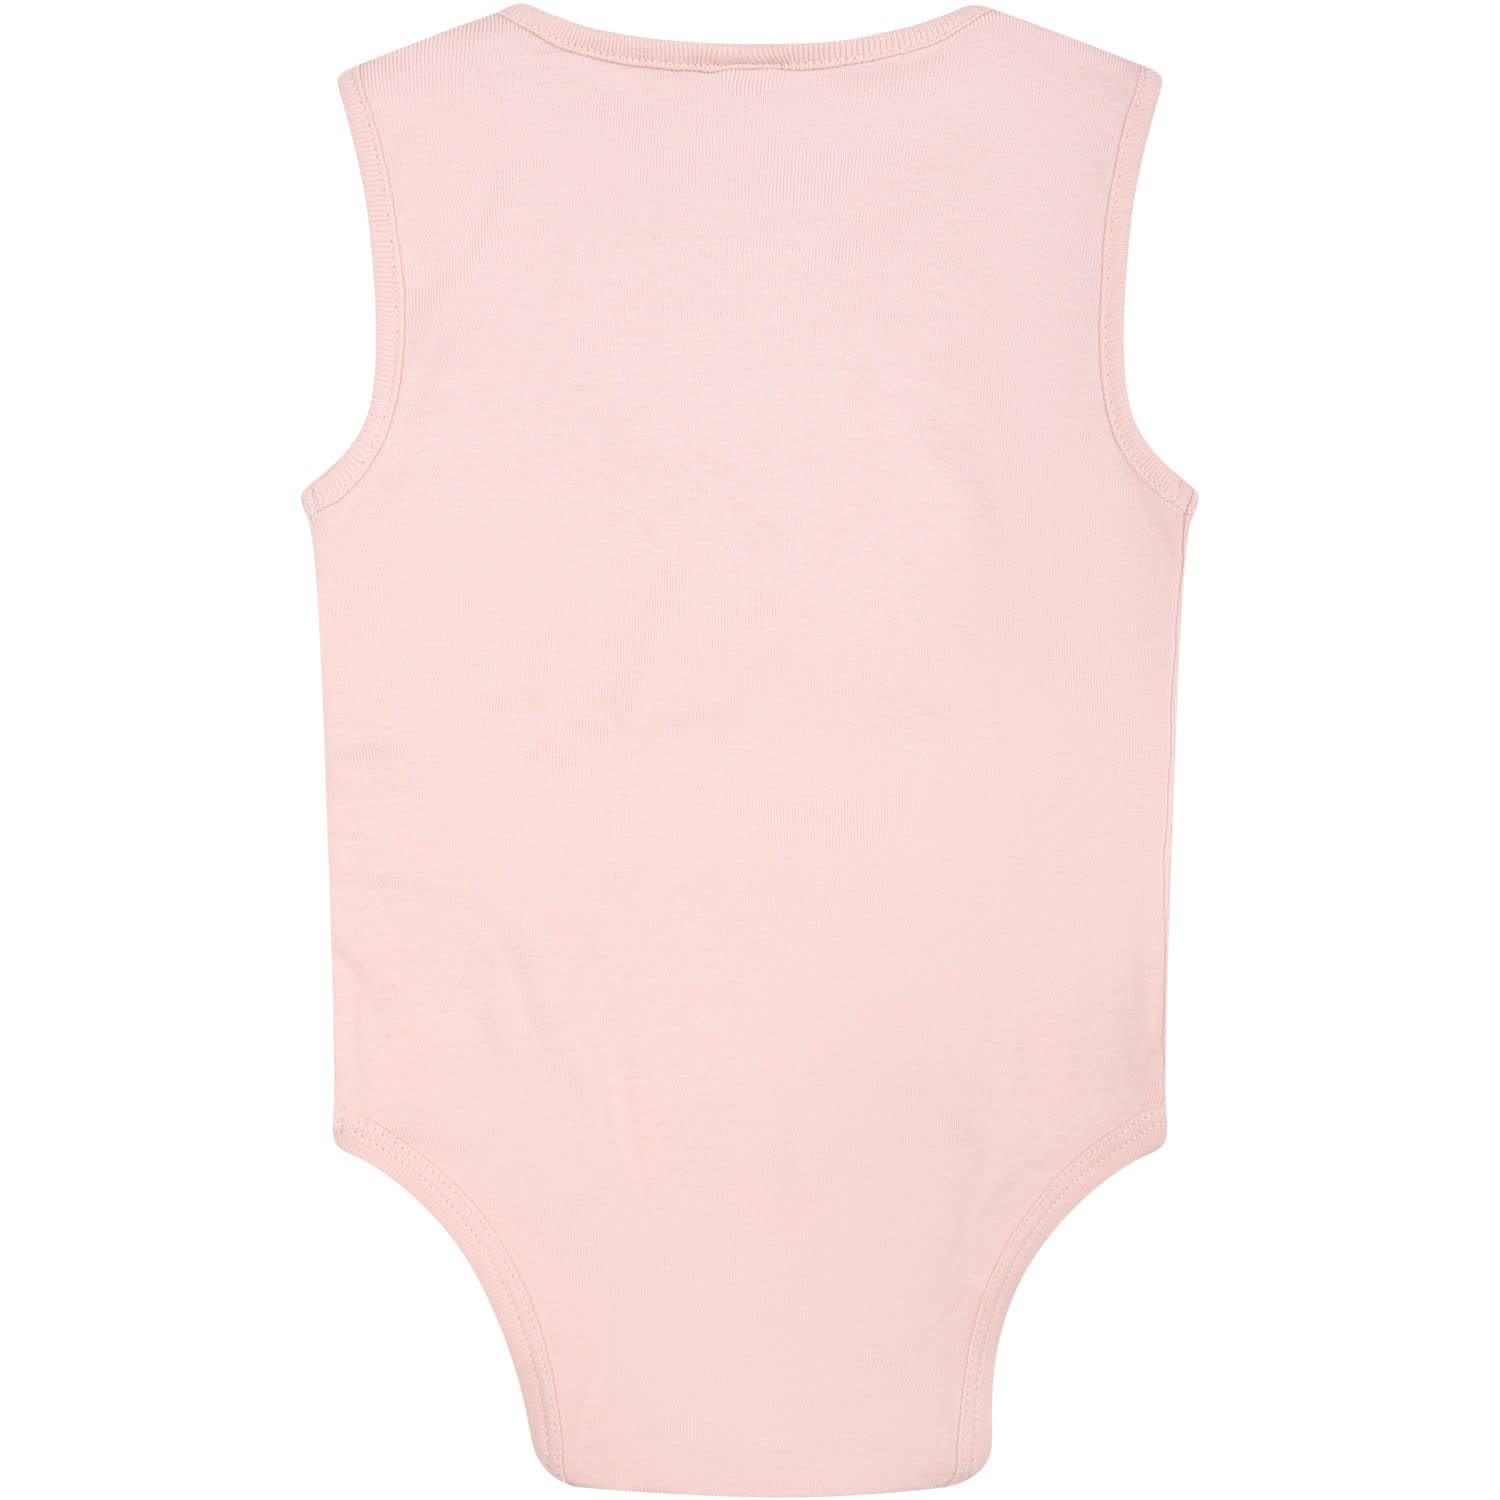 Shop Stella Mccartney Multicolor Set For Baby Girl With Apples